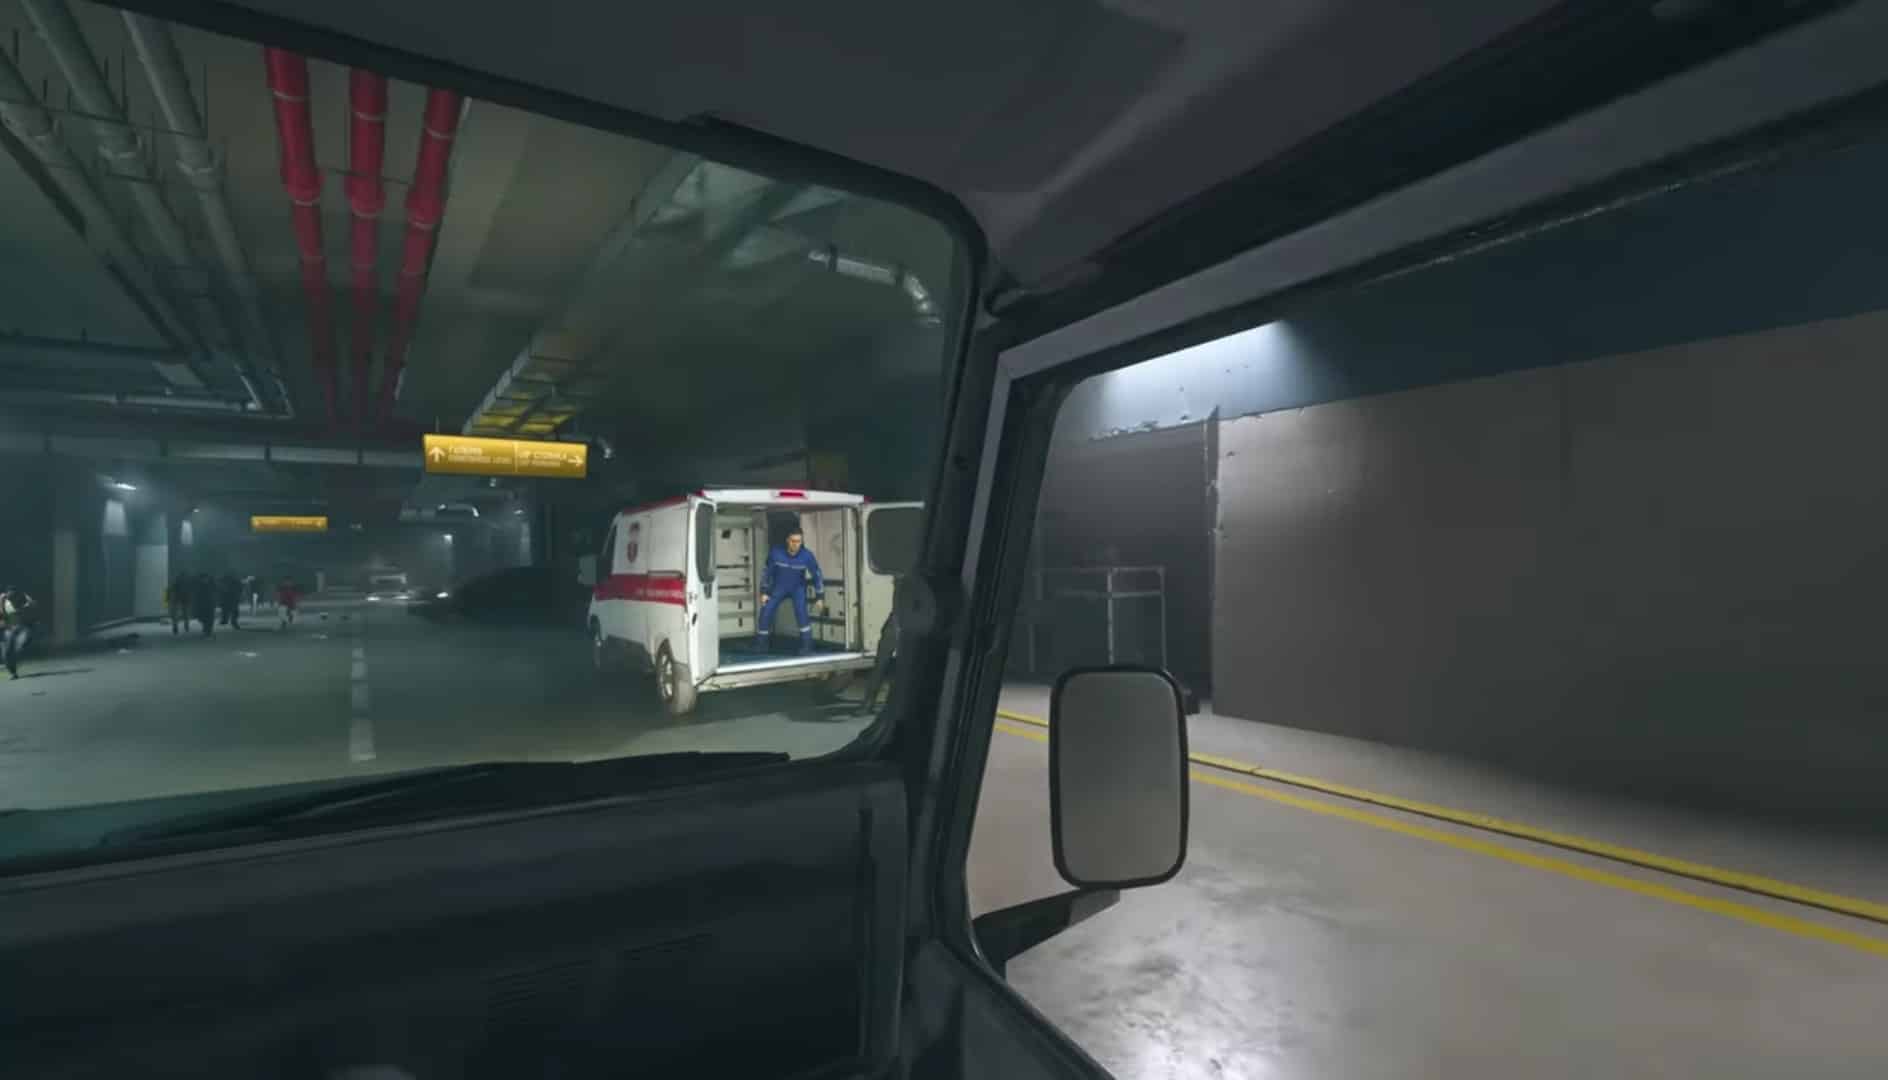 Discover hidden details and Easter eggs inside a truck in a parking garage.